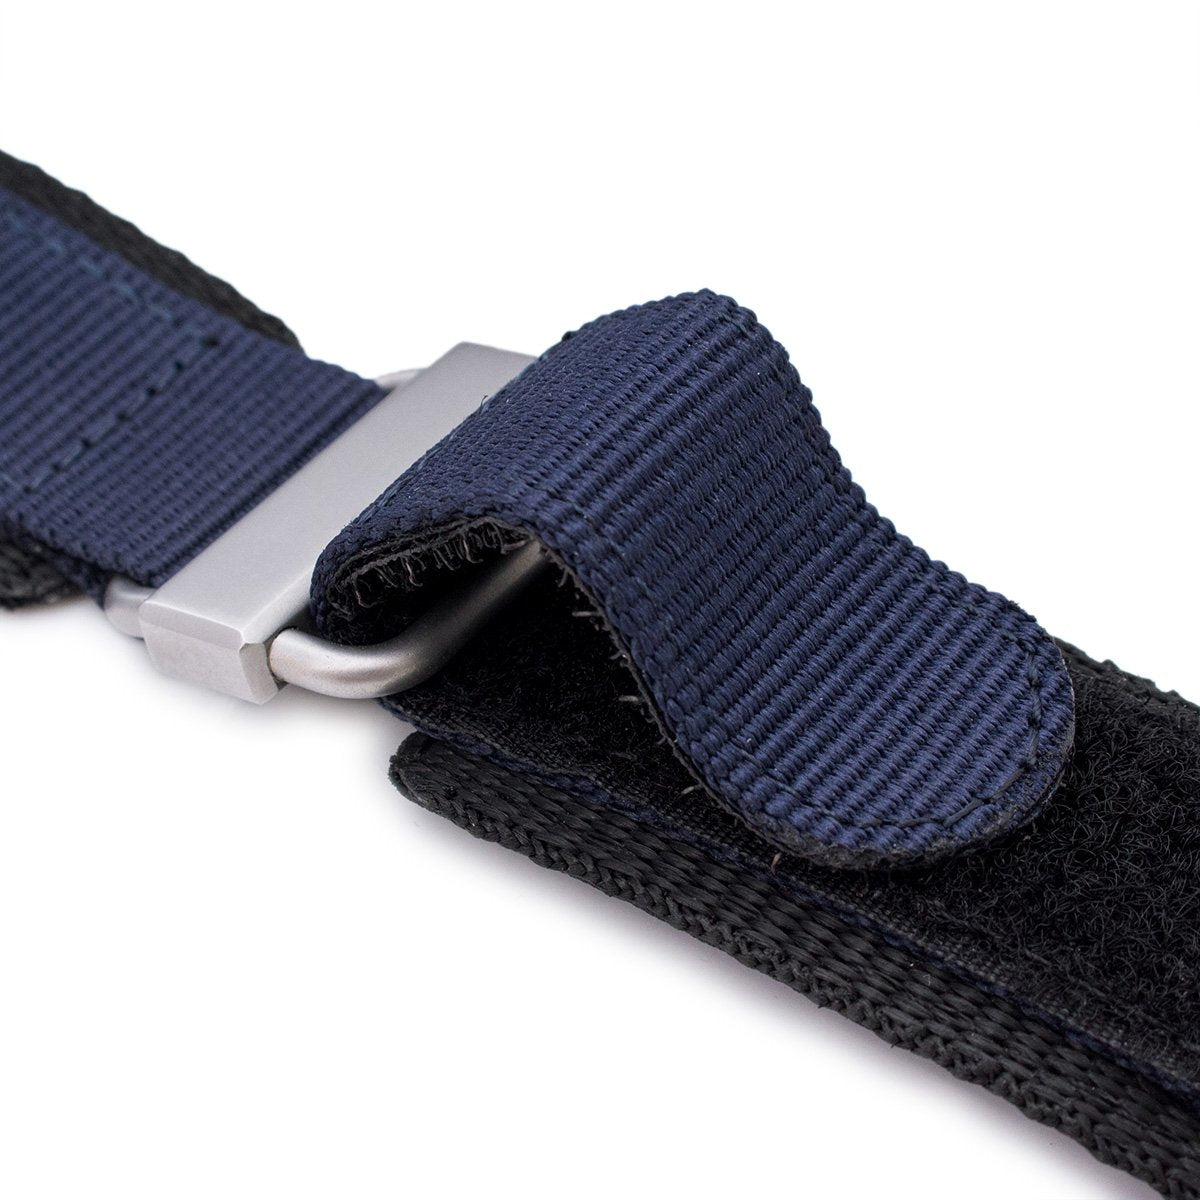 22mm MiLTAT Honeycomb Navy Blue Nylon Velcro Fastener Watch Strap Brushed Stainless Buckle Strapcode Watch Bands